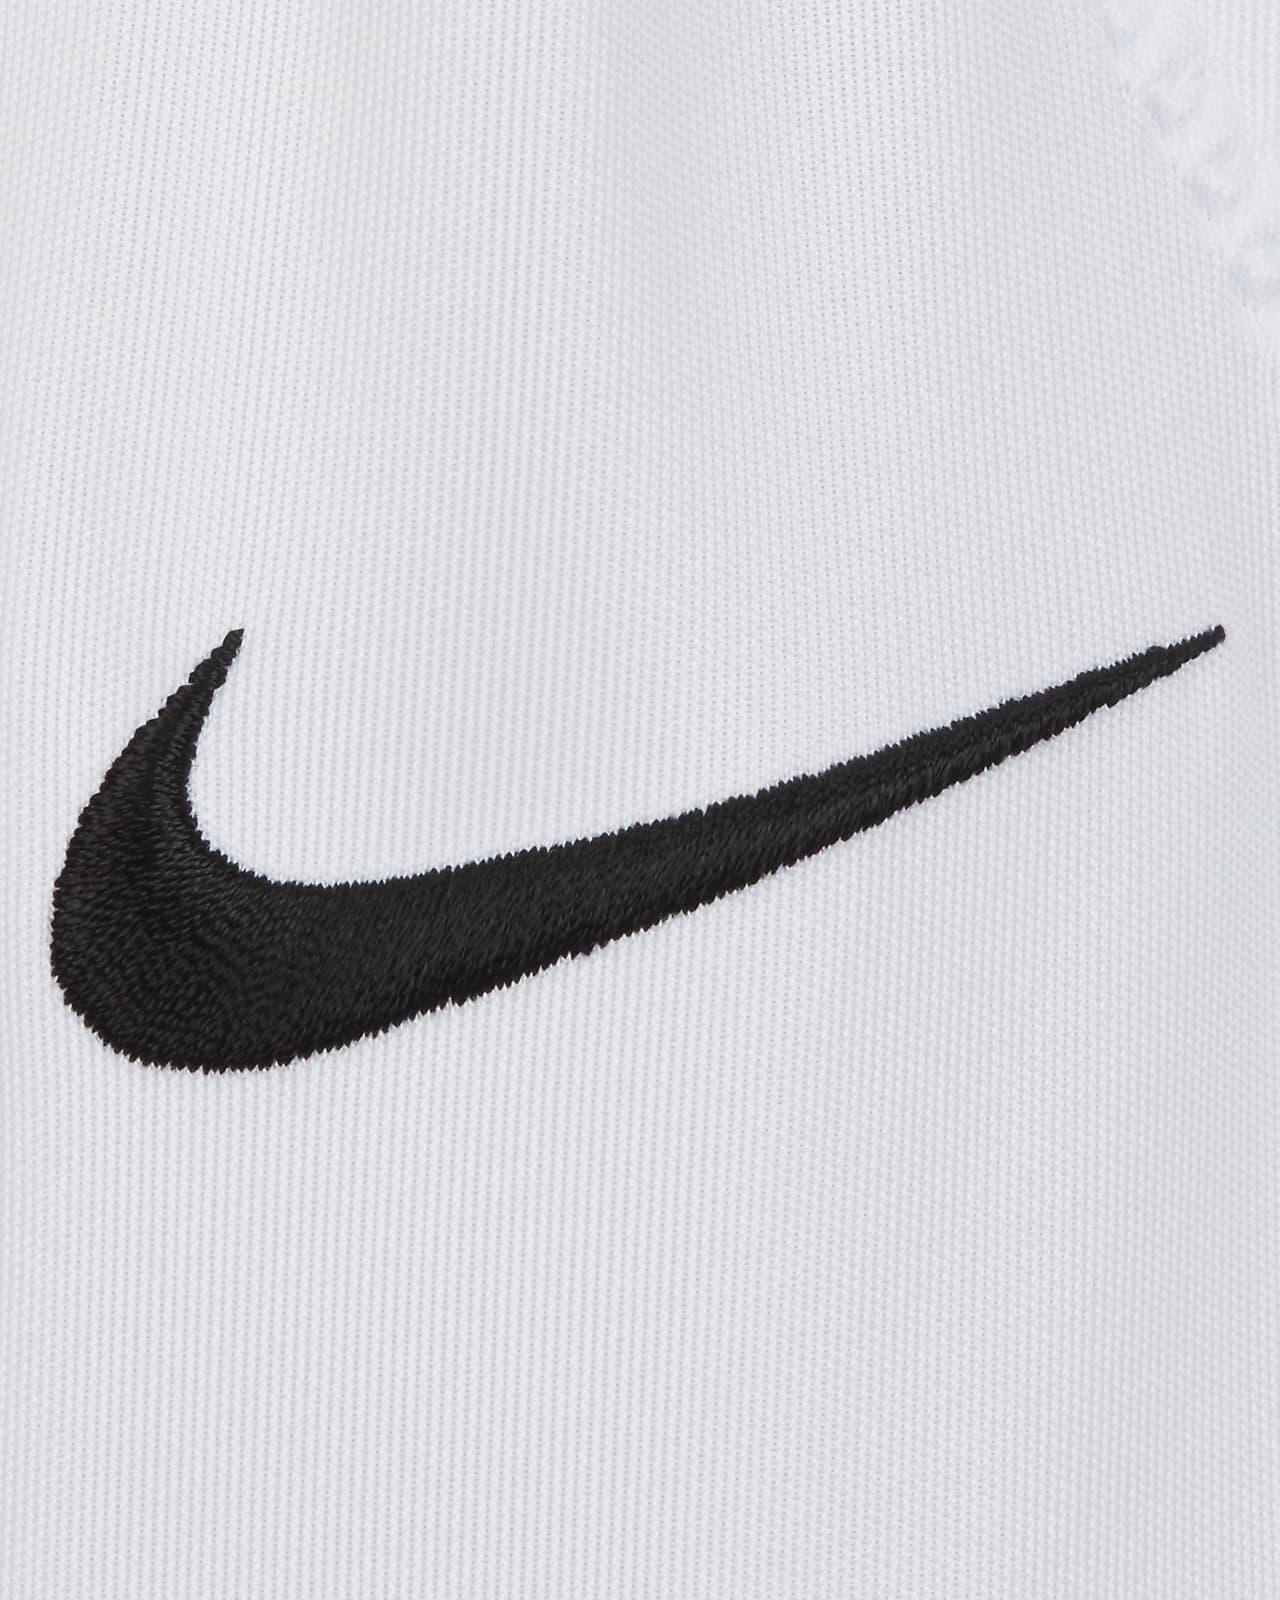 nike youth football pants with pads